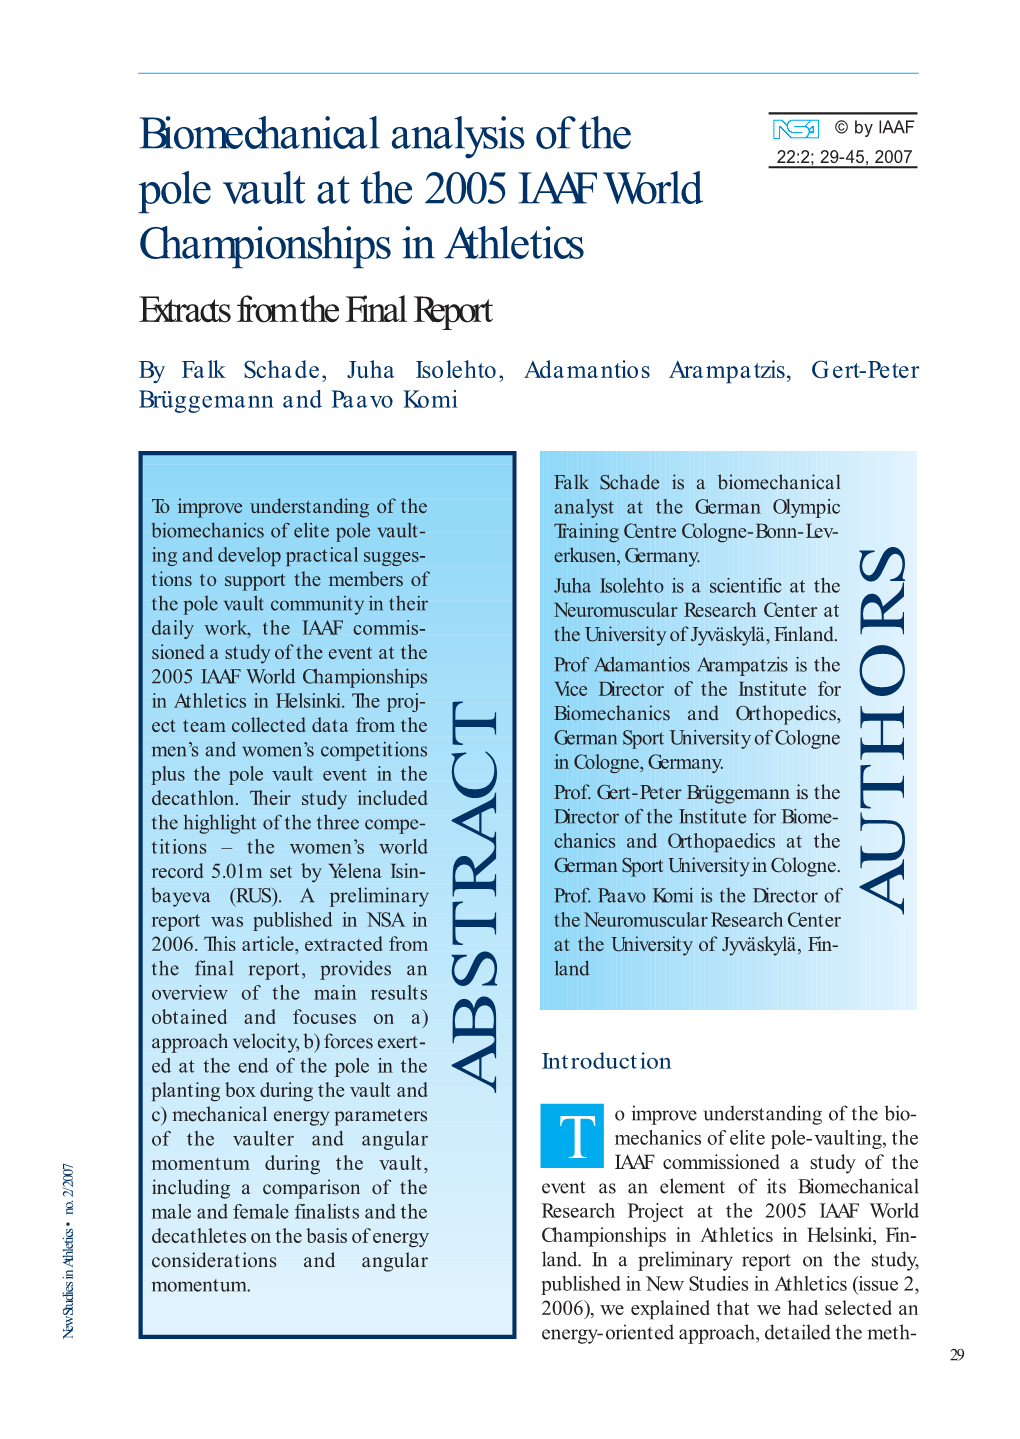 Biomechanical Analysis of the Pole Vault at the 2005 IAAF World Championships in Athletics